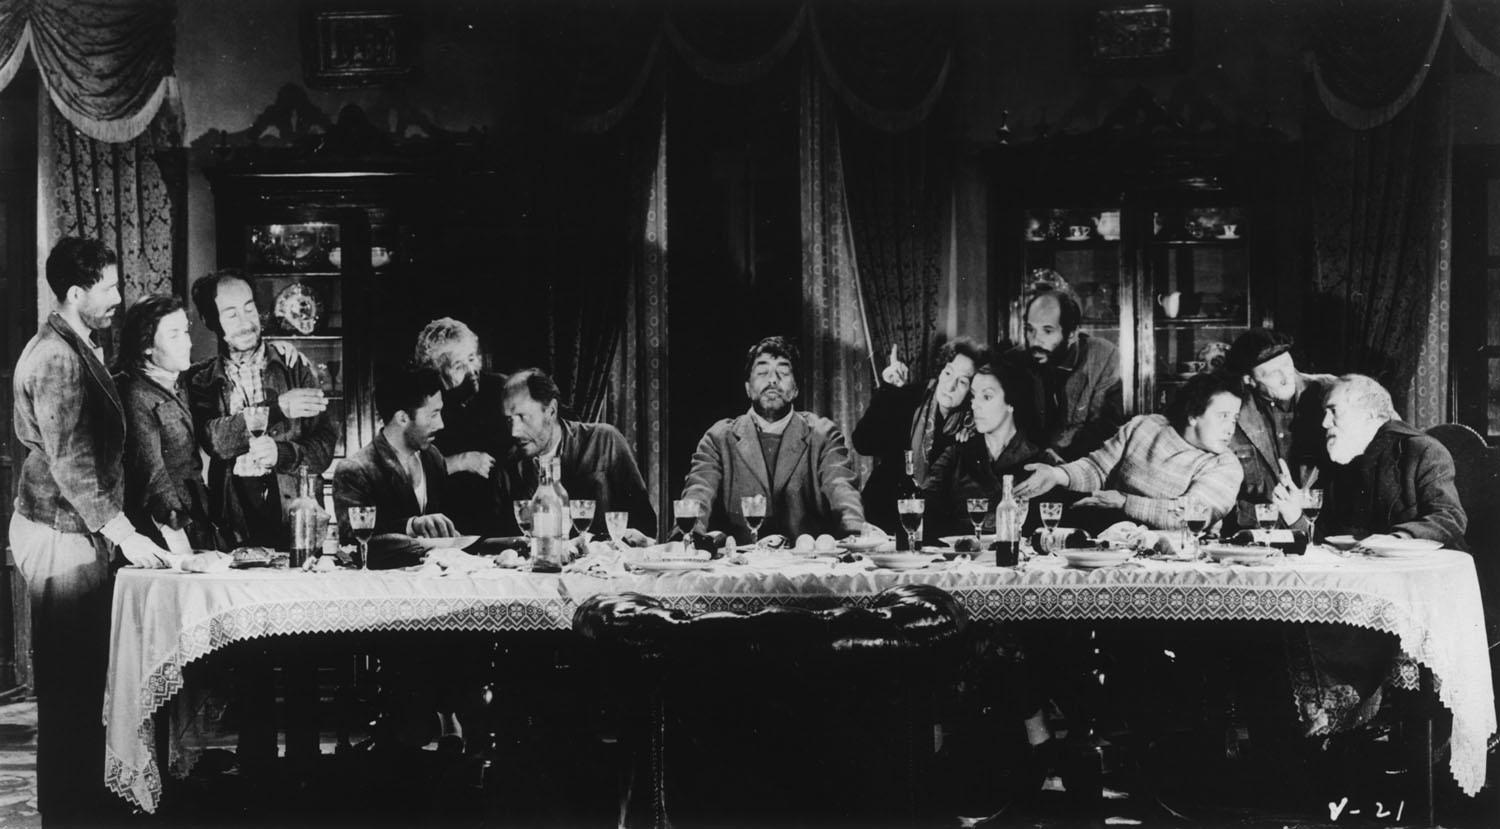 Things You Should Know About 'The Last Supper'